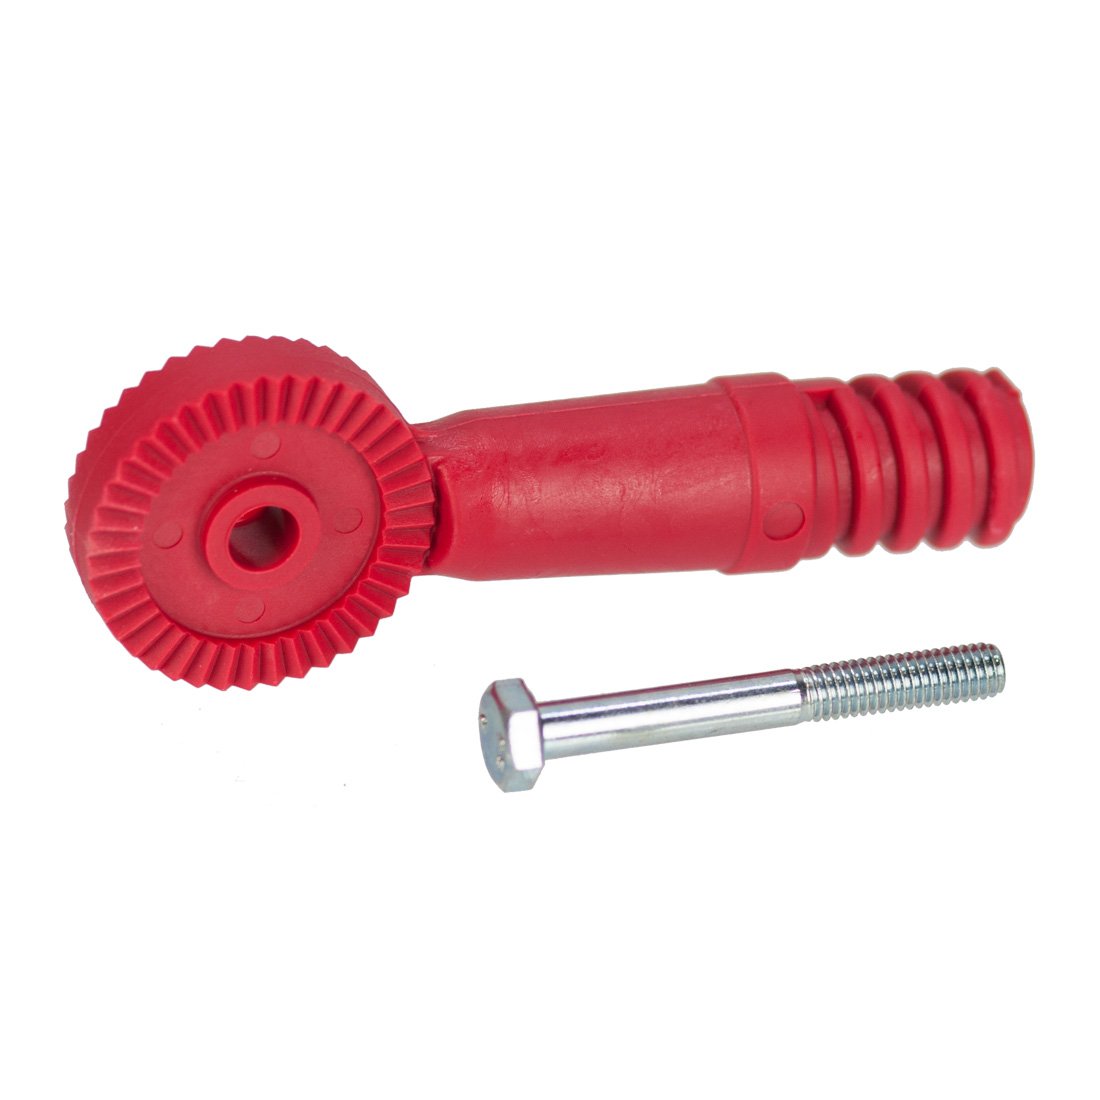 RHG Reach Around Adapter Kit - Horizontal Bolt and Adapter View